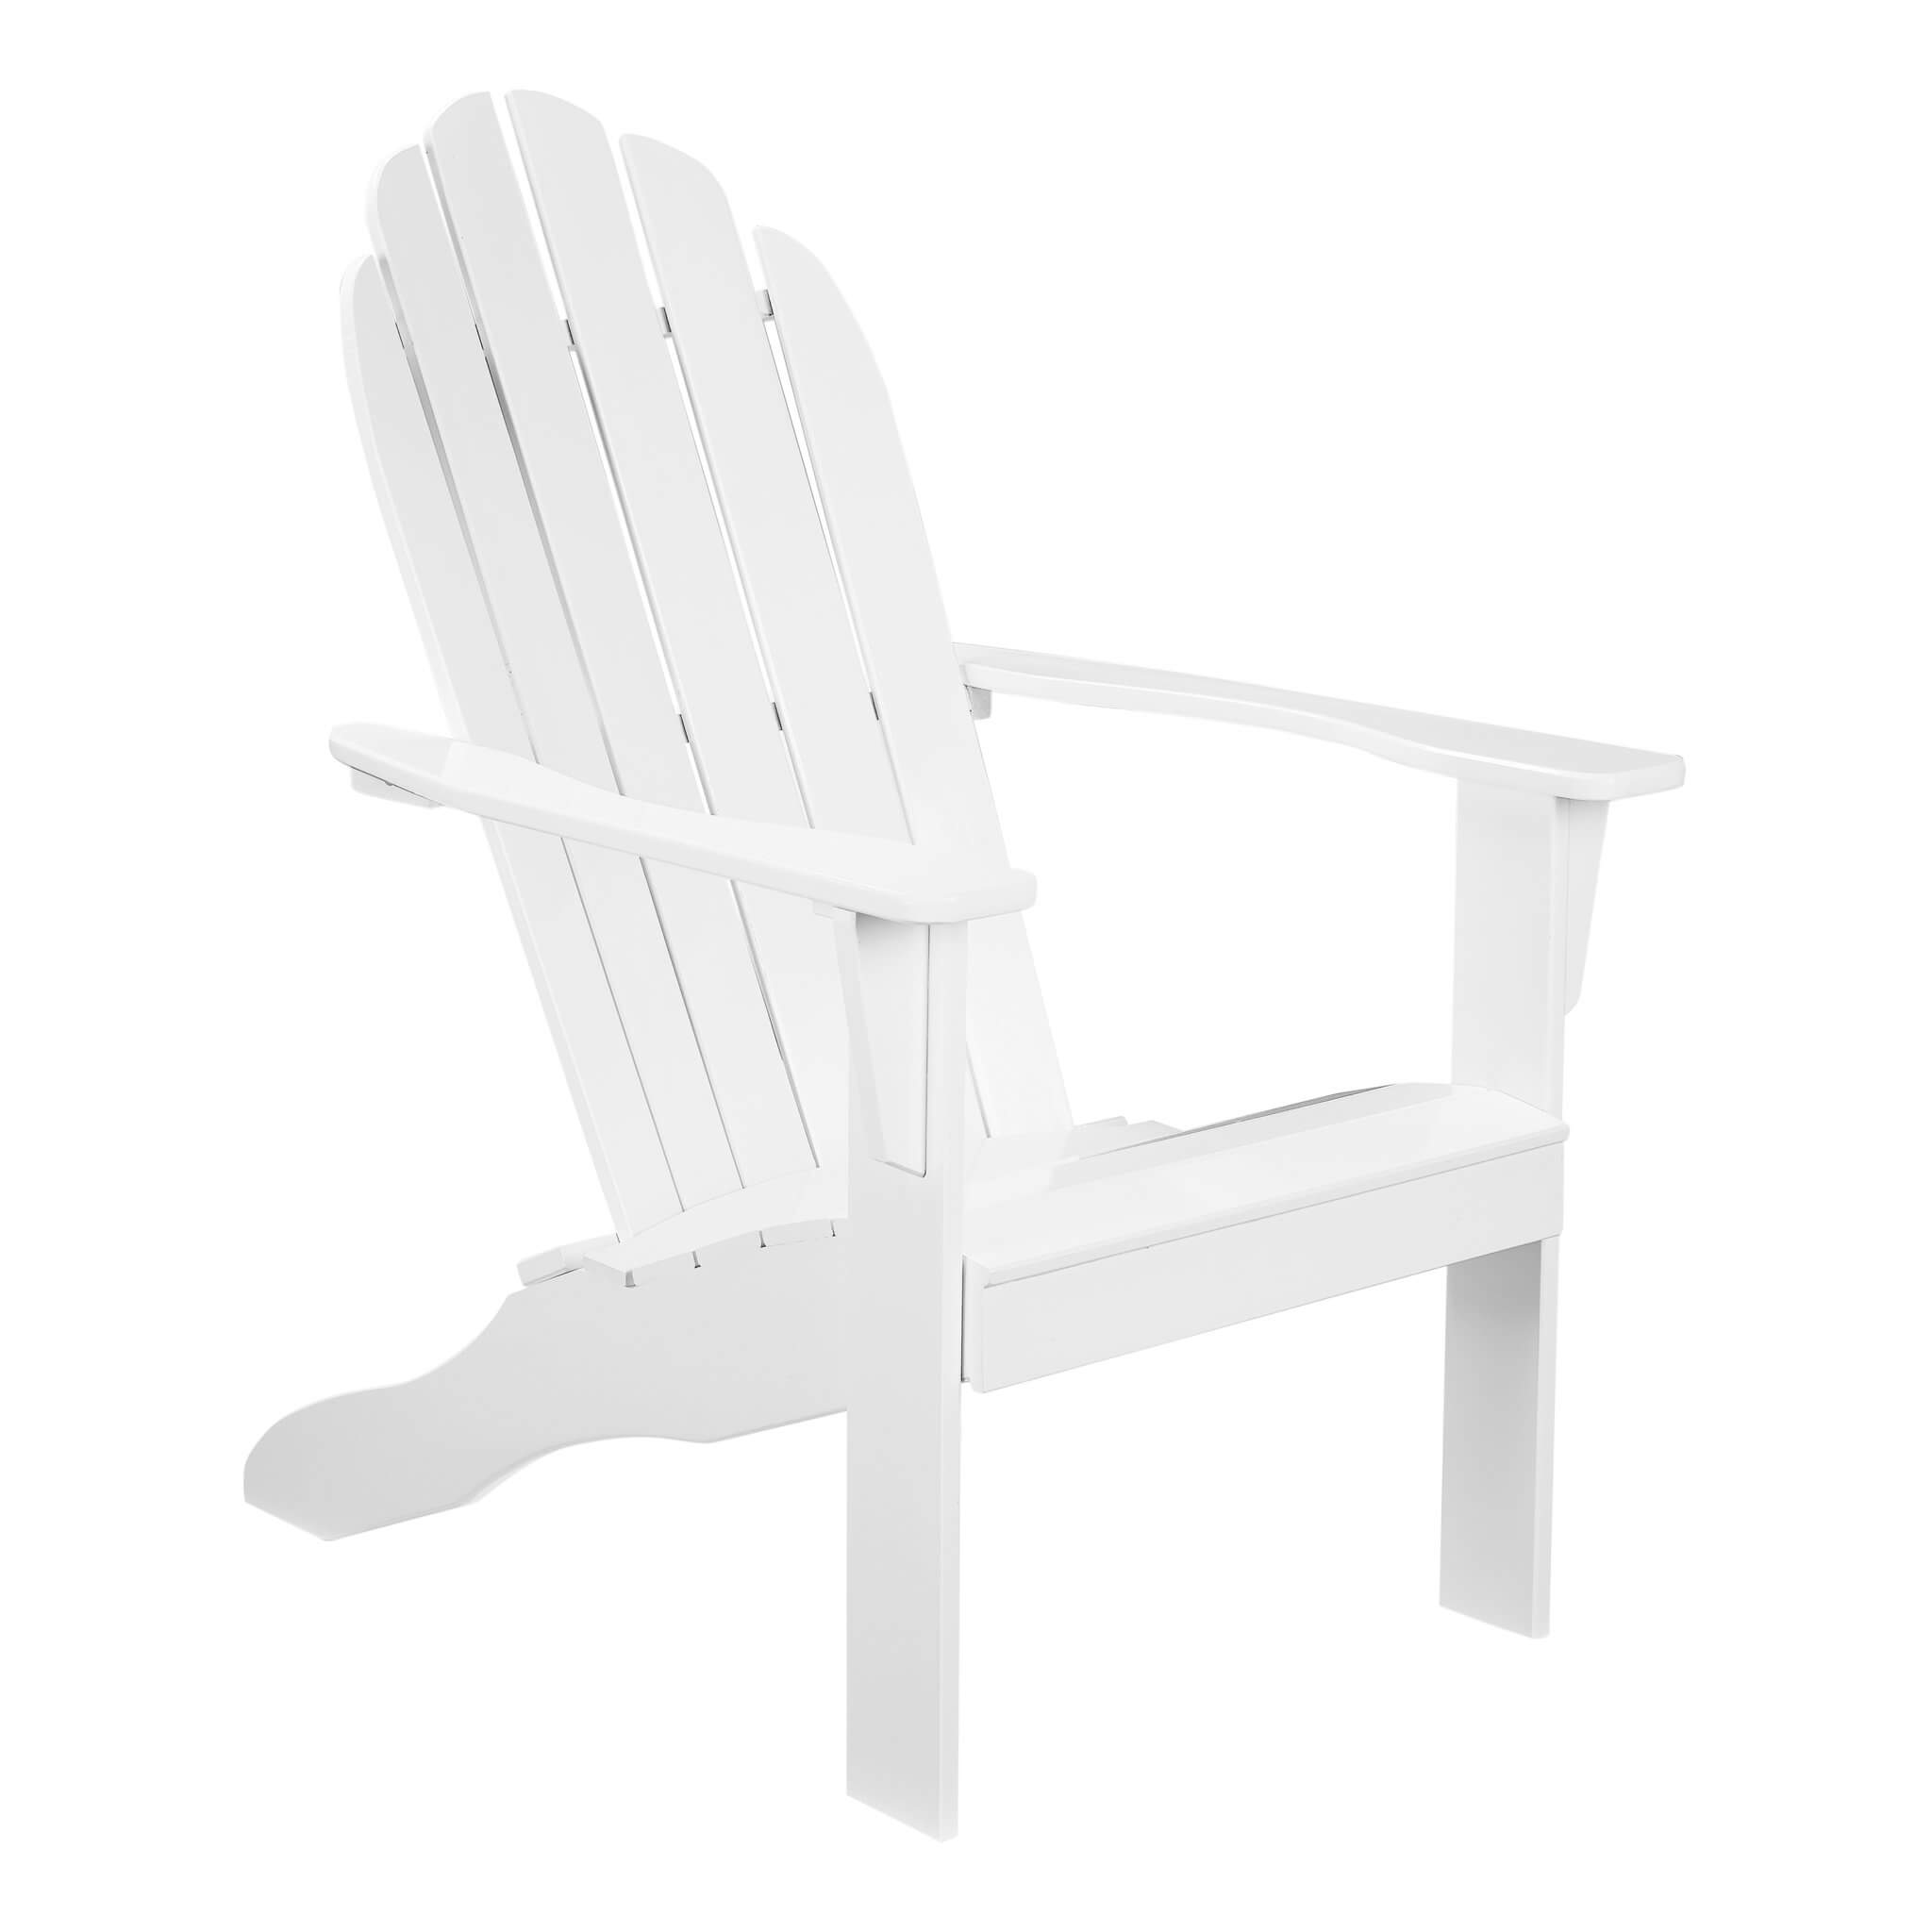 Mainstays Outdoor Wood Adirondack Chair ONLY $69.00 Shipped (Reg $120)